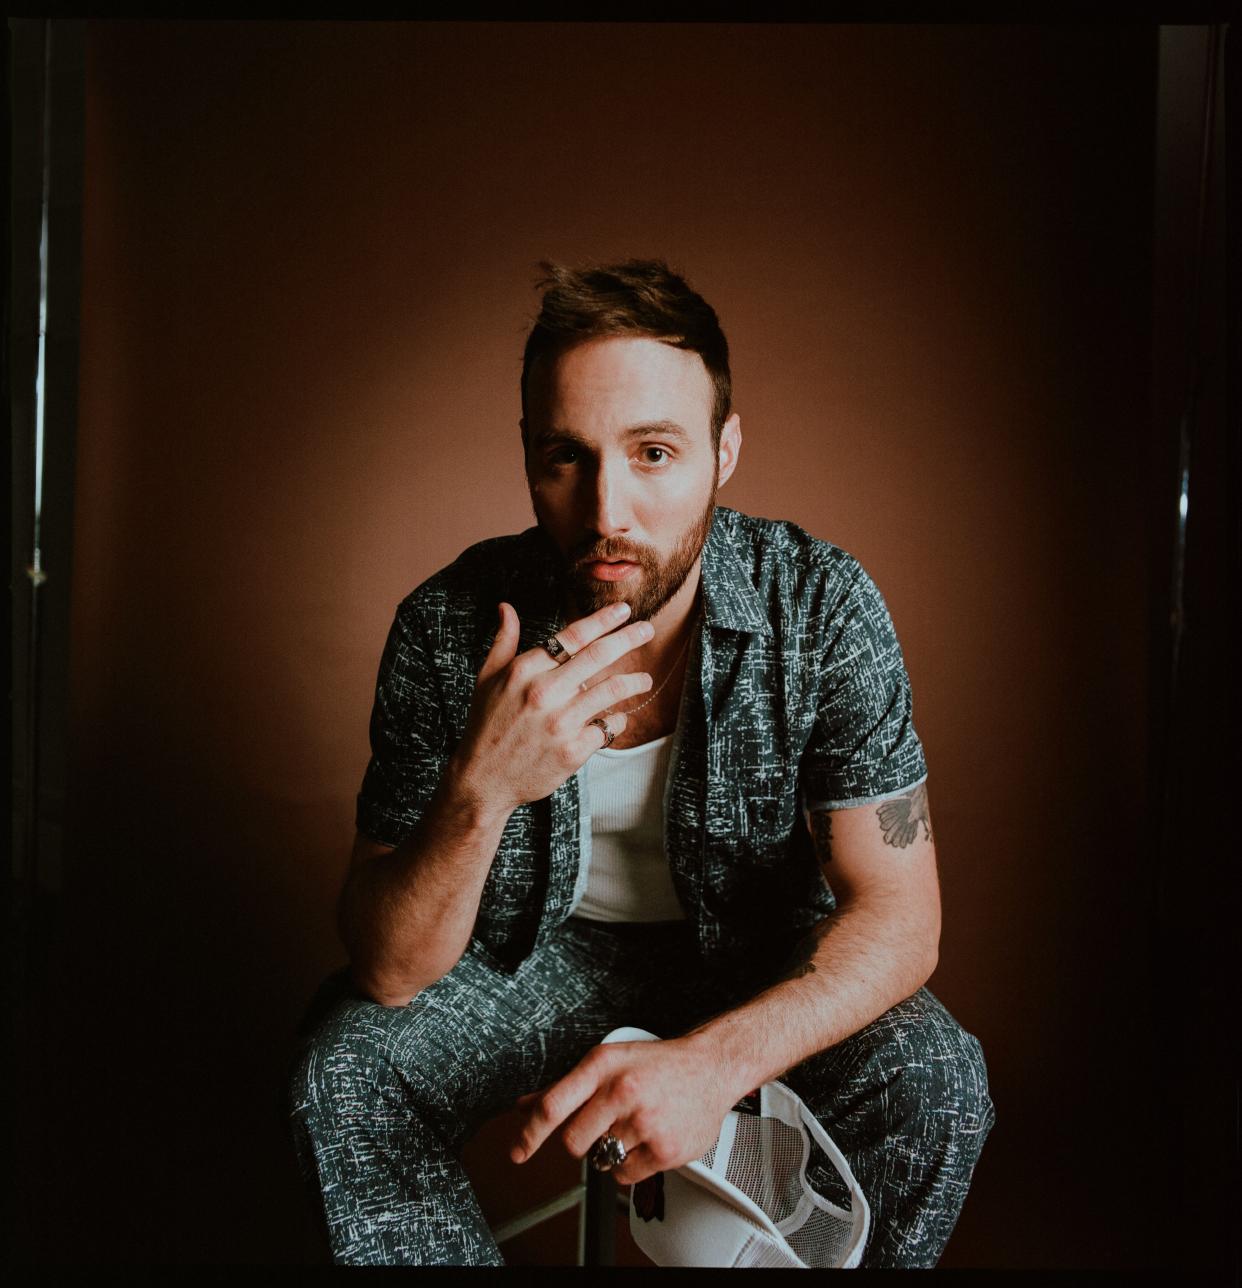 Ruston Kelly releases his new album, "The Weakness," on April 7.